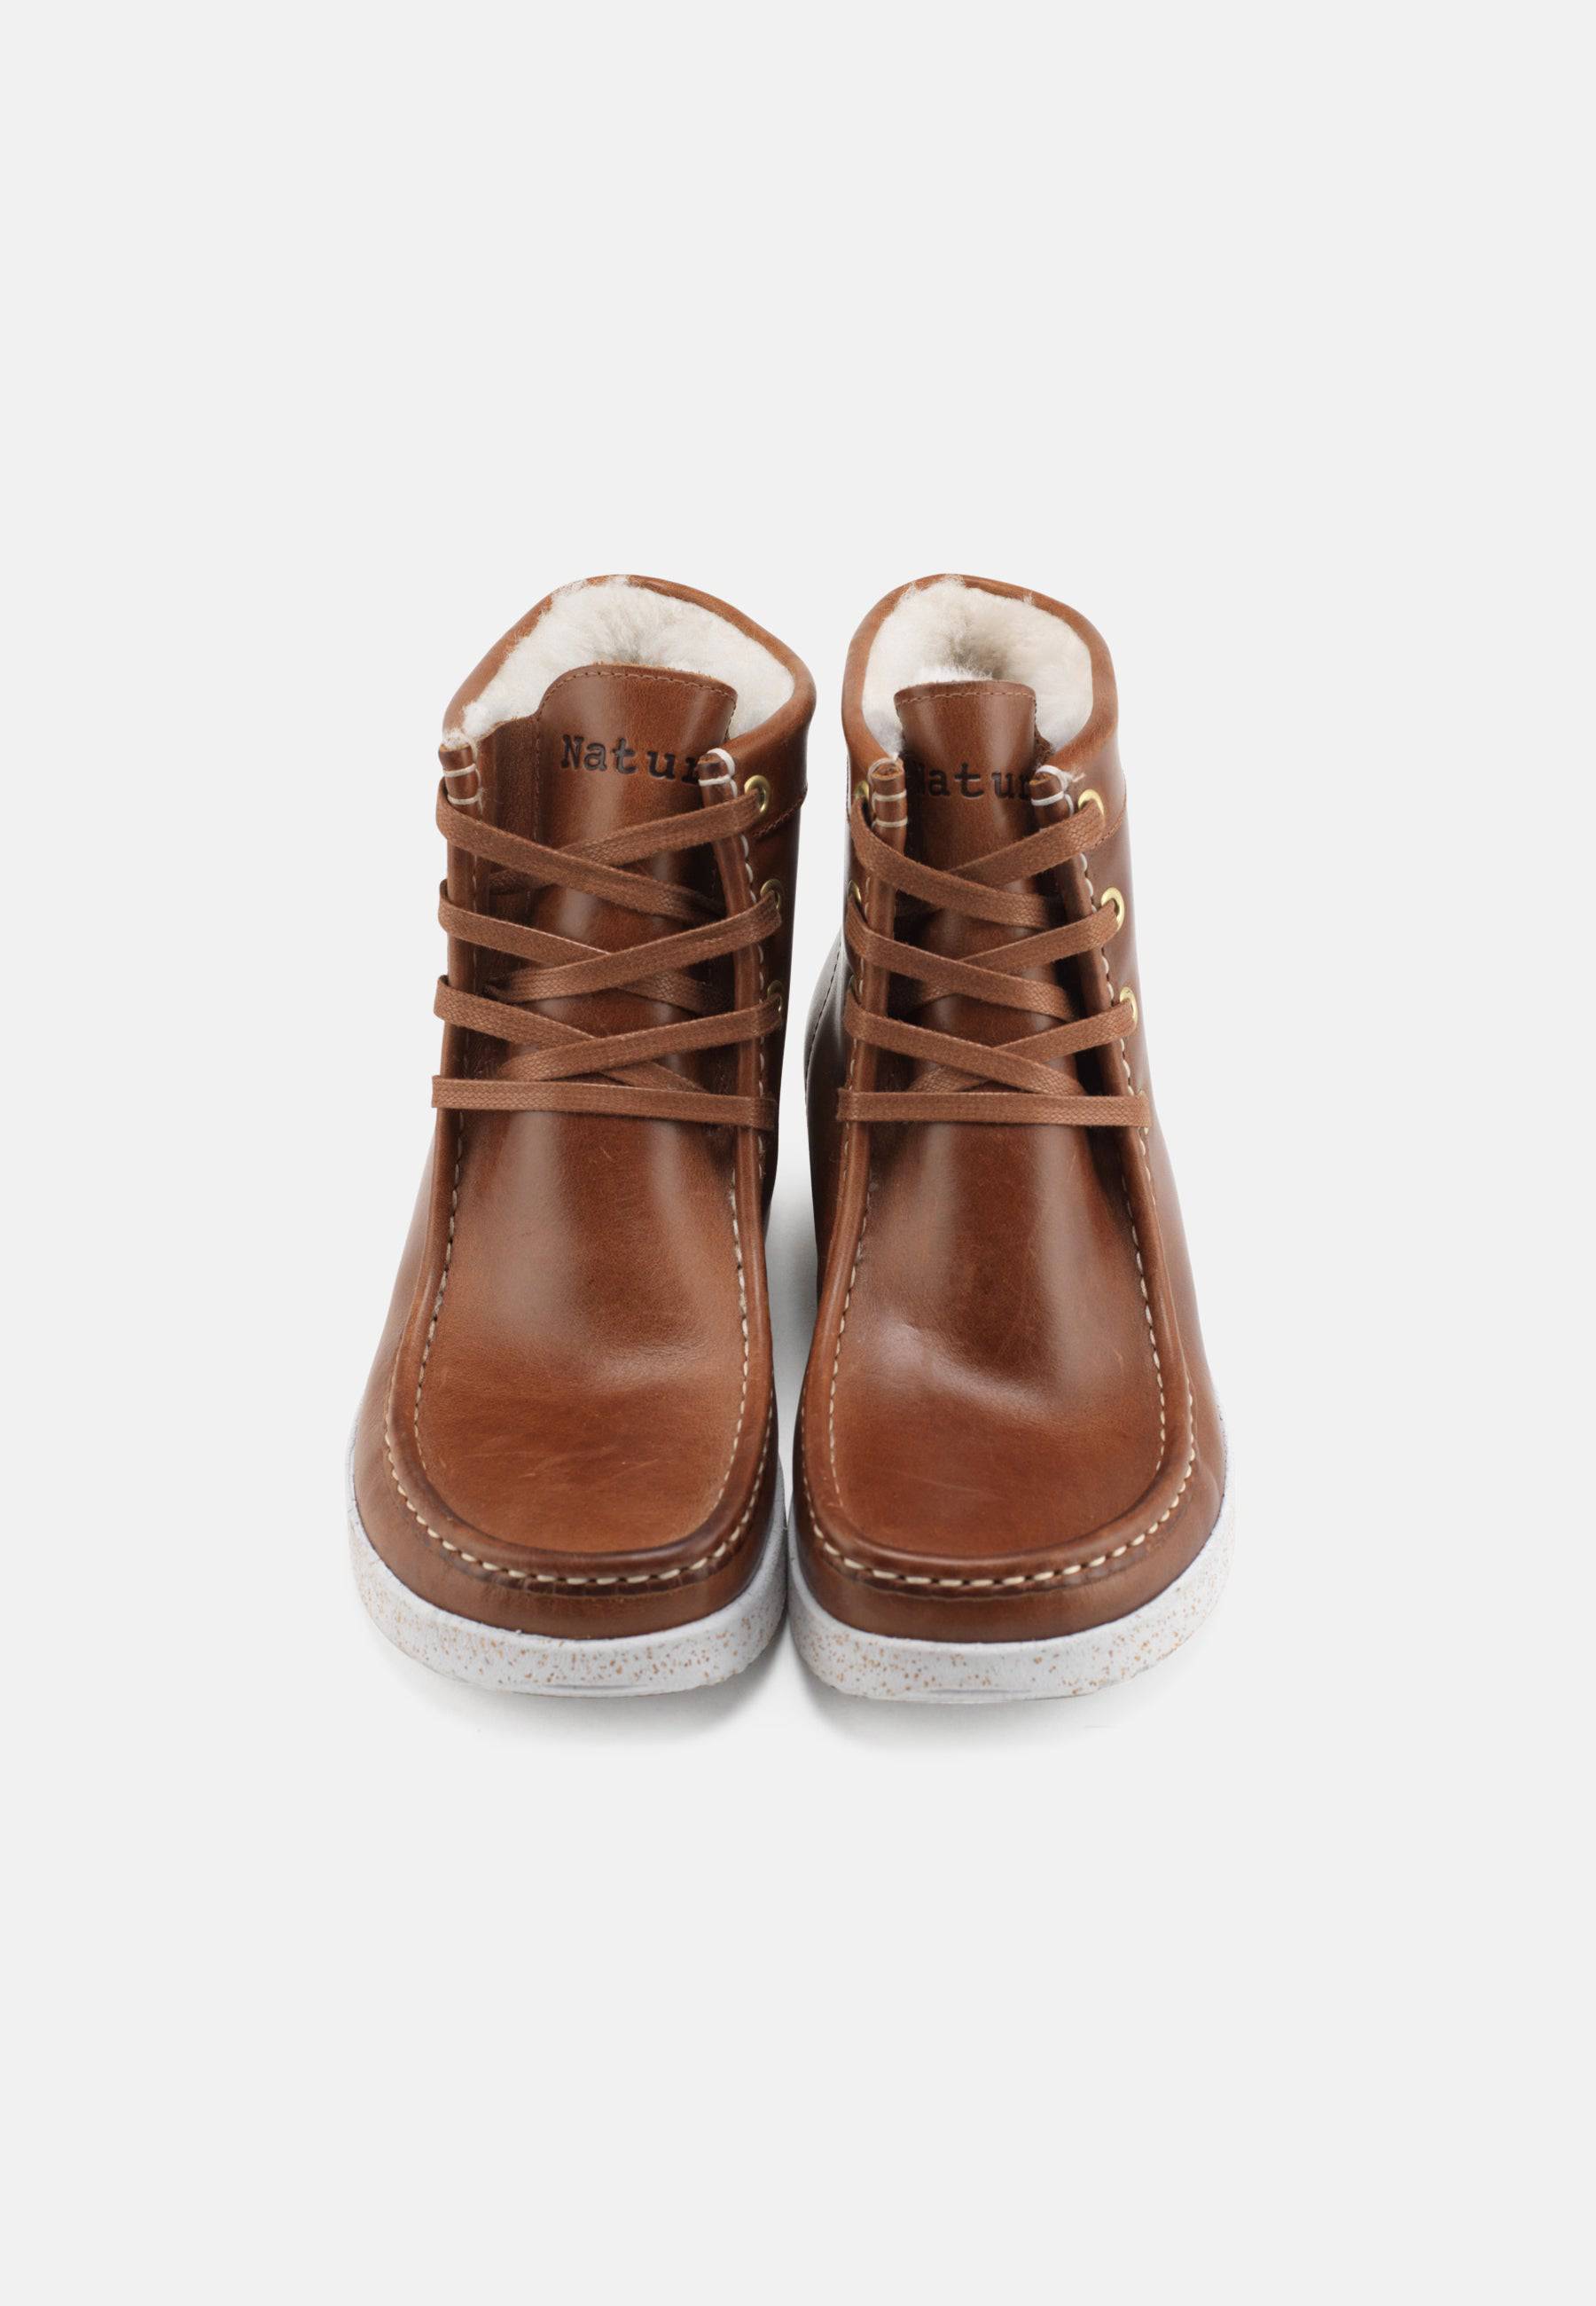 Asta Warm Lined Boot Leather - Tobacco